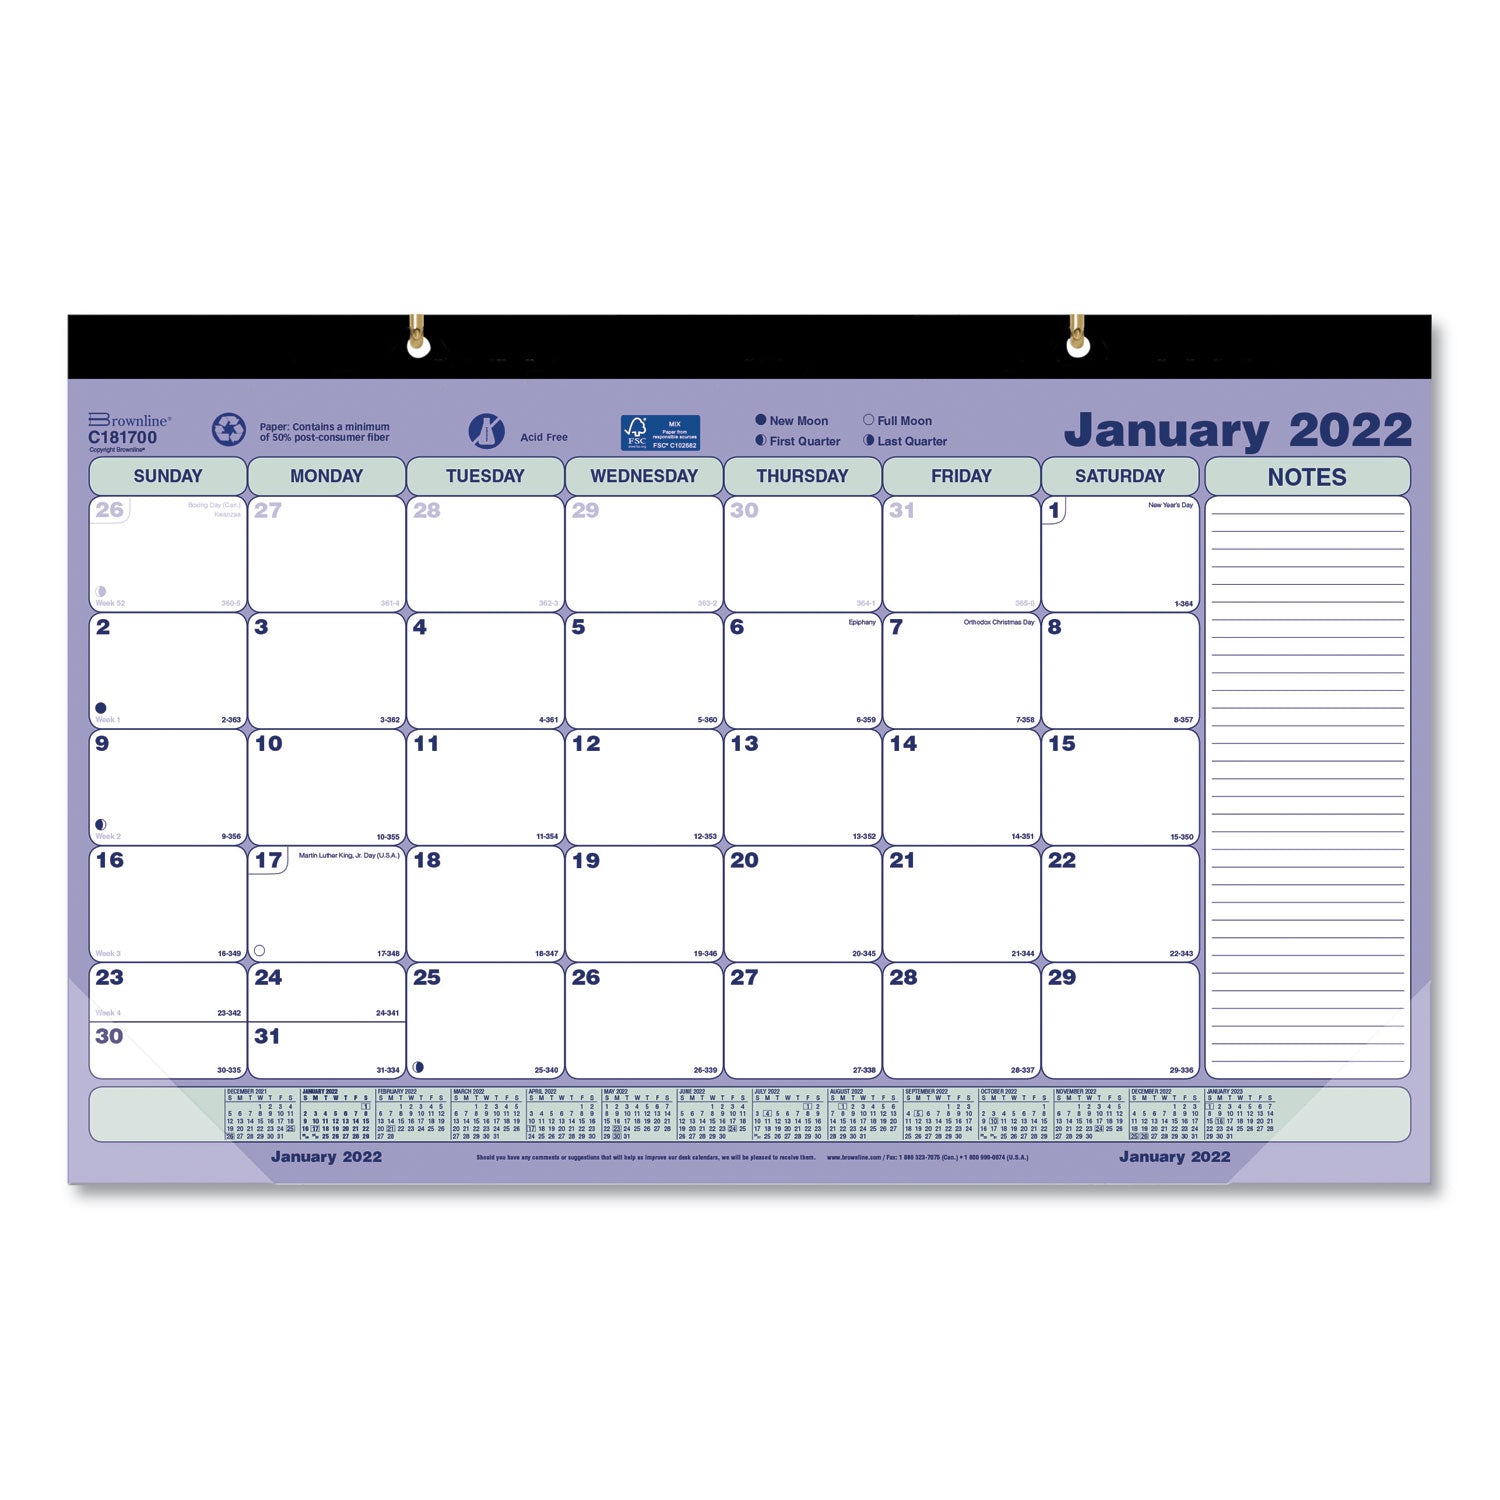 monthly-desk-pad-calendar-1775-x-1088-white-blue-green-sheets-black-binding-clear-corners-12-month-jan-to-dec-2024_redc181700 - 3